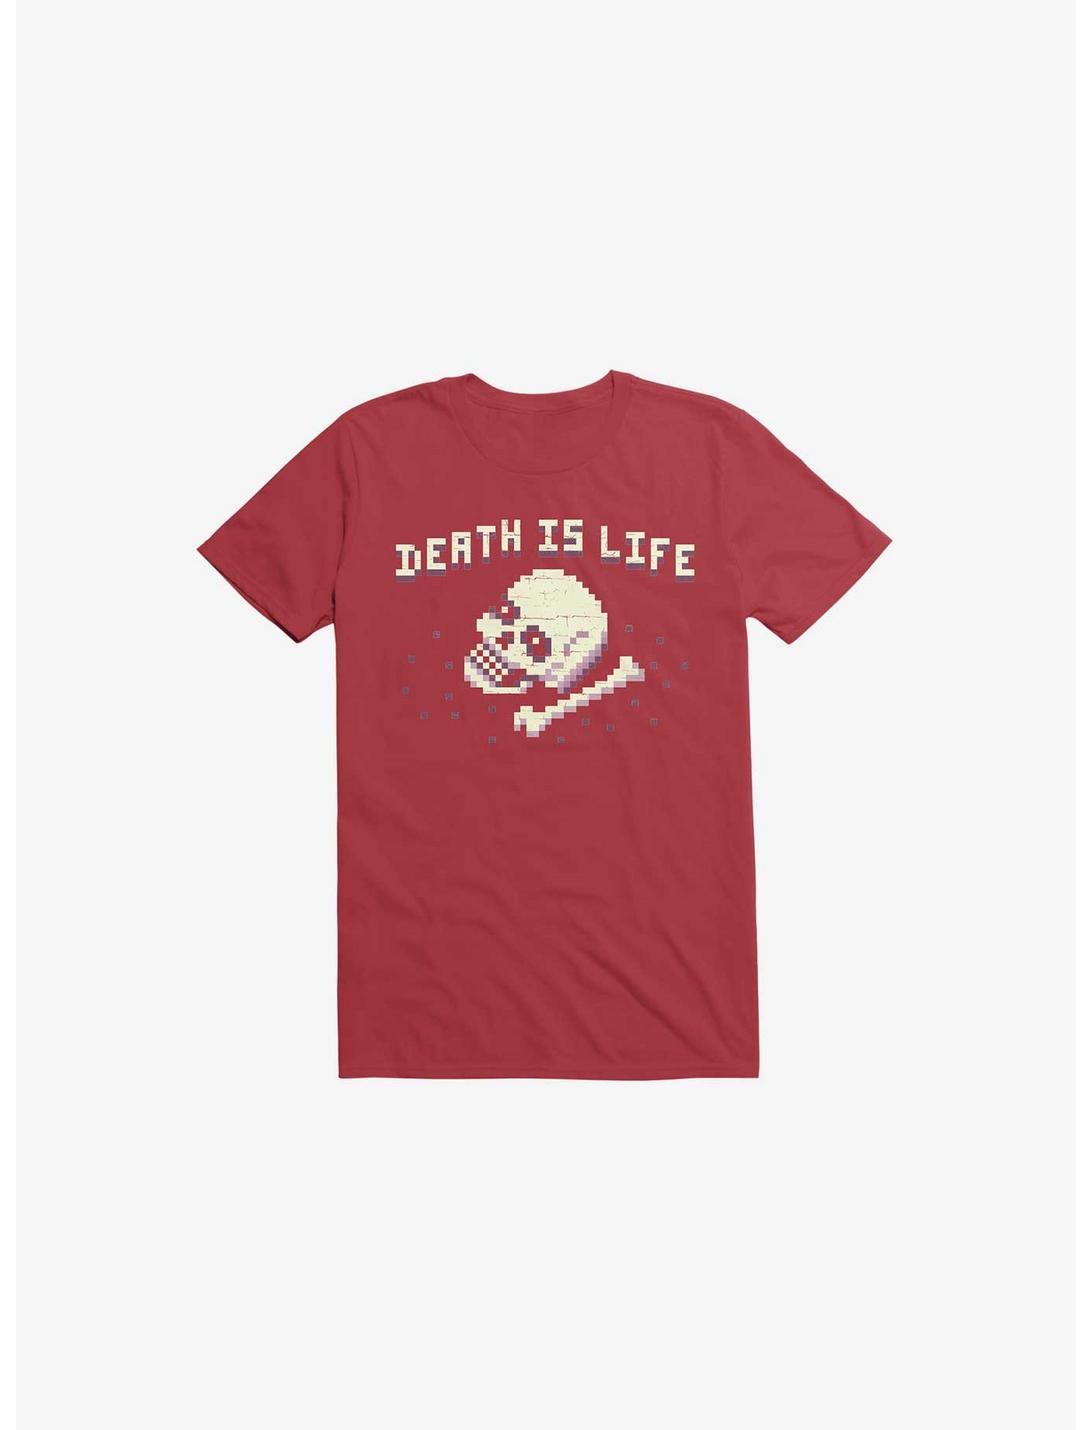 Death Is Life Skull Red T-Shirt, RED, hi-res